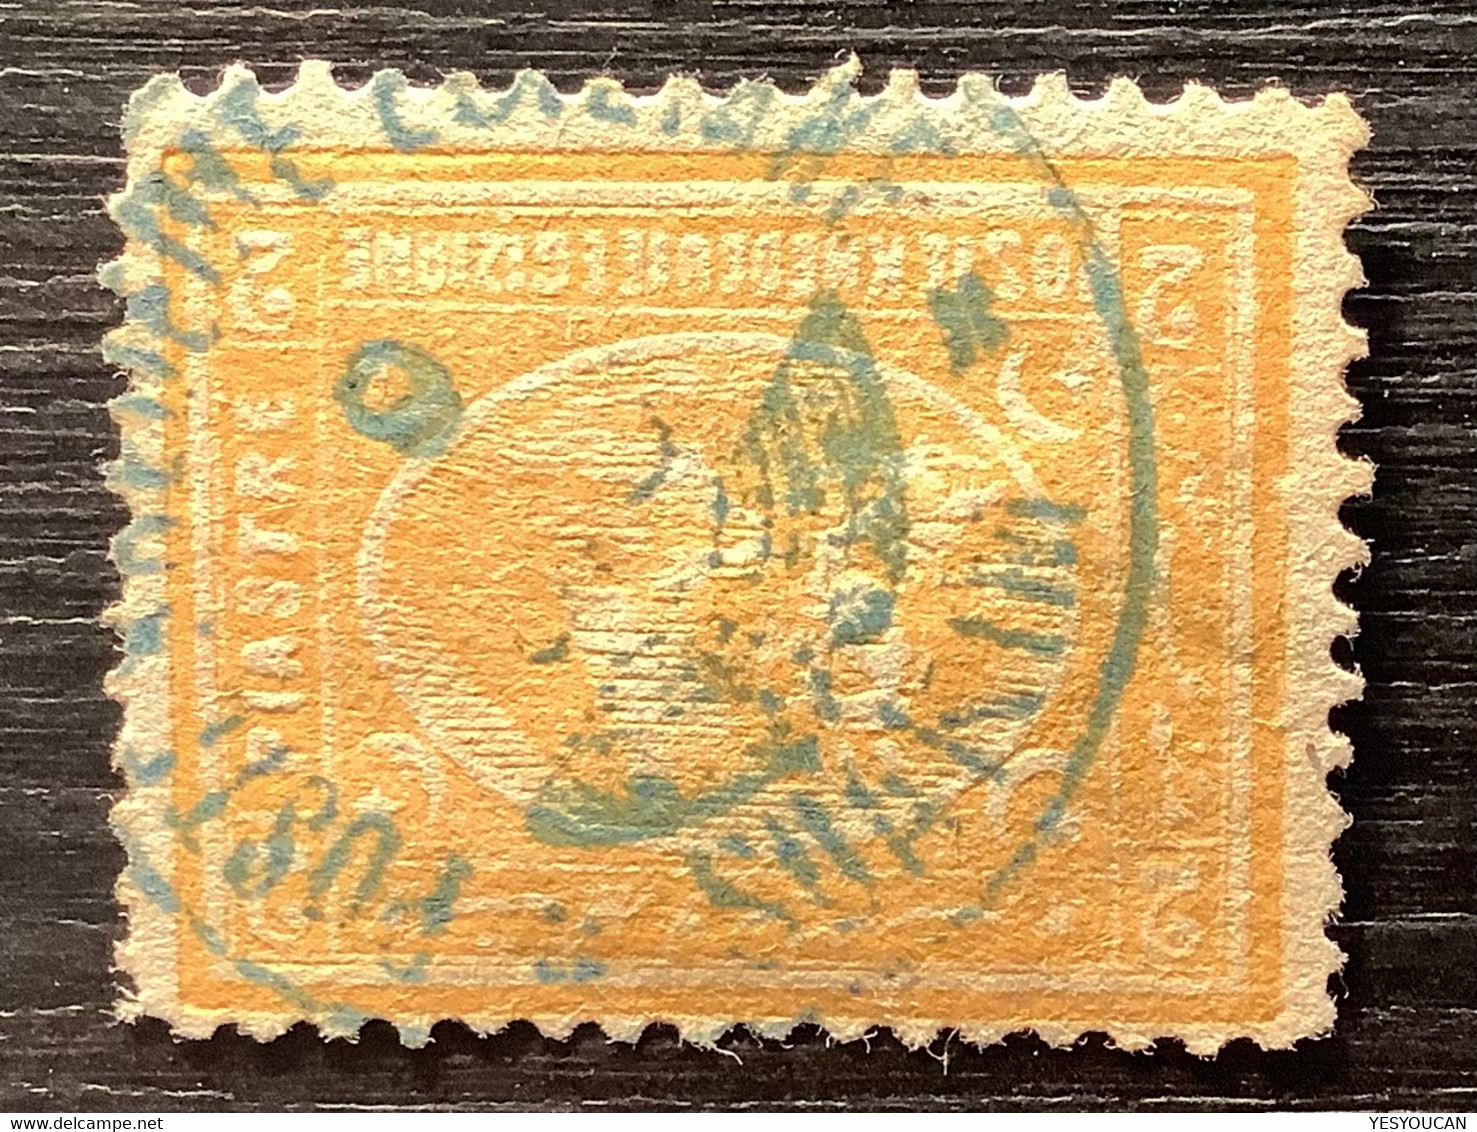 Egypt Used In Sudan: SUAKIM RRR ! (Suakin Soudan) On 1872 2 Pi ONLY ONE COVER KNOWN WITH THIS POSTMARK (Egypte - 1866-1914 Khédivat D'Égypte